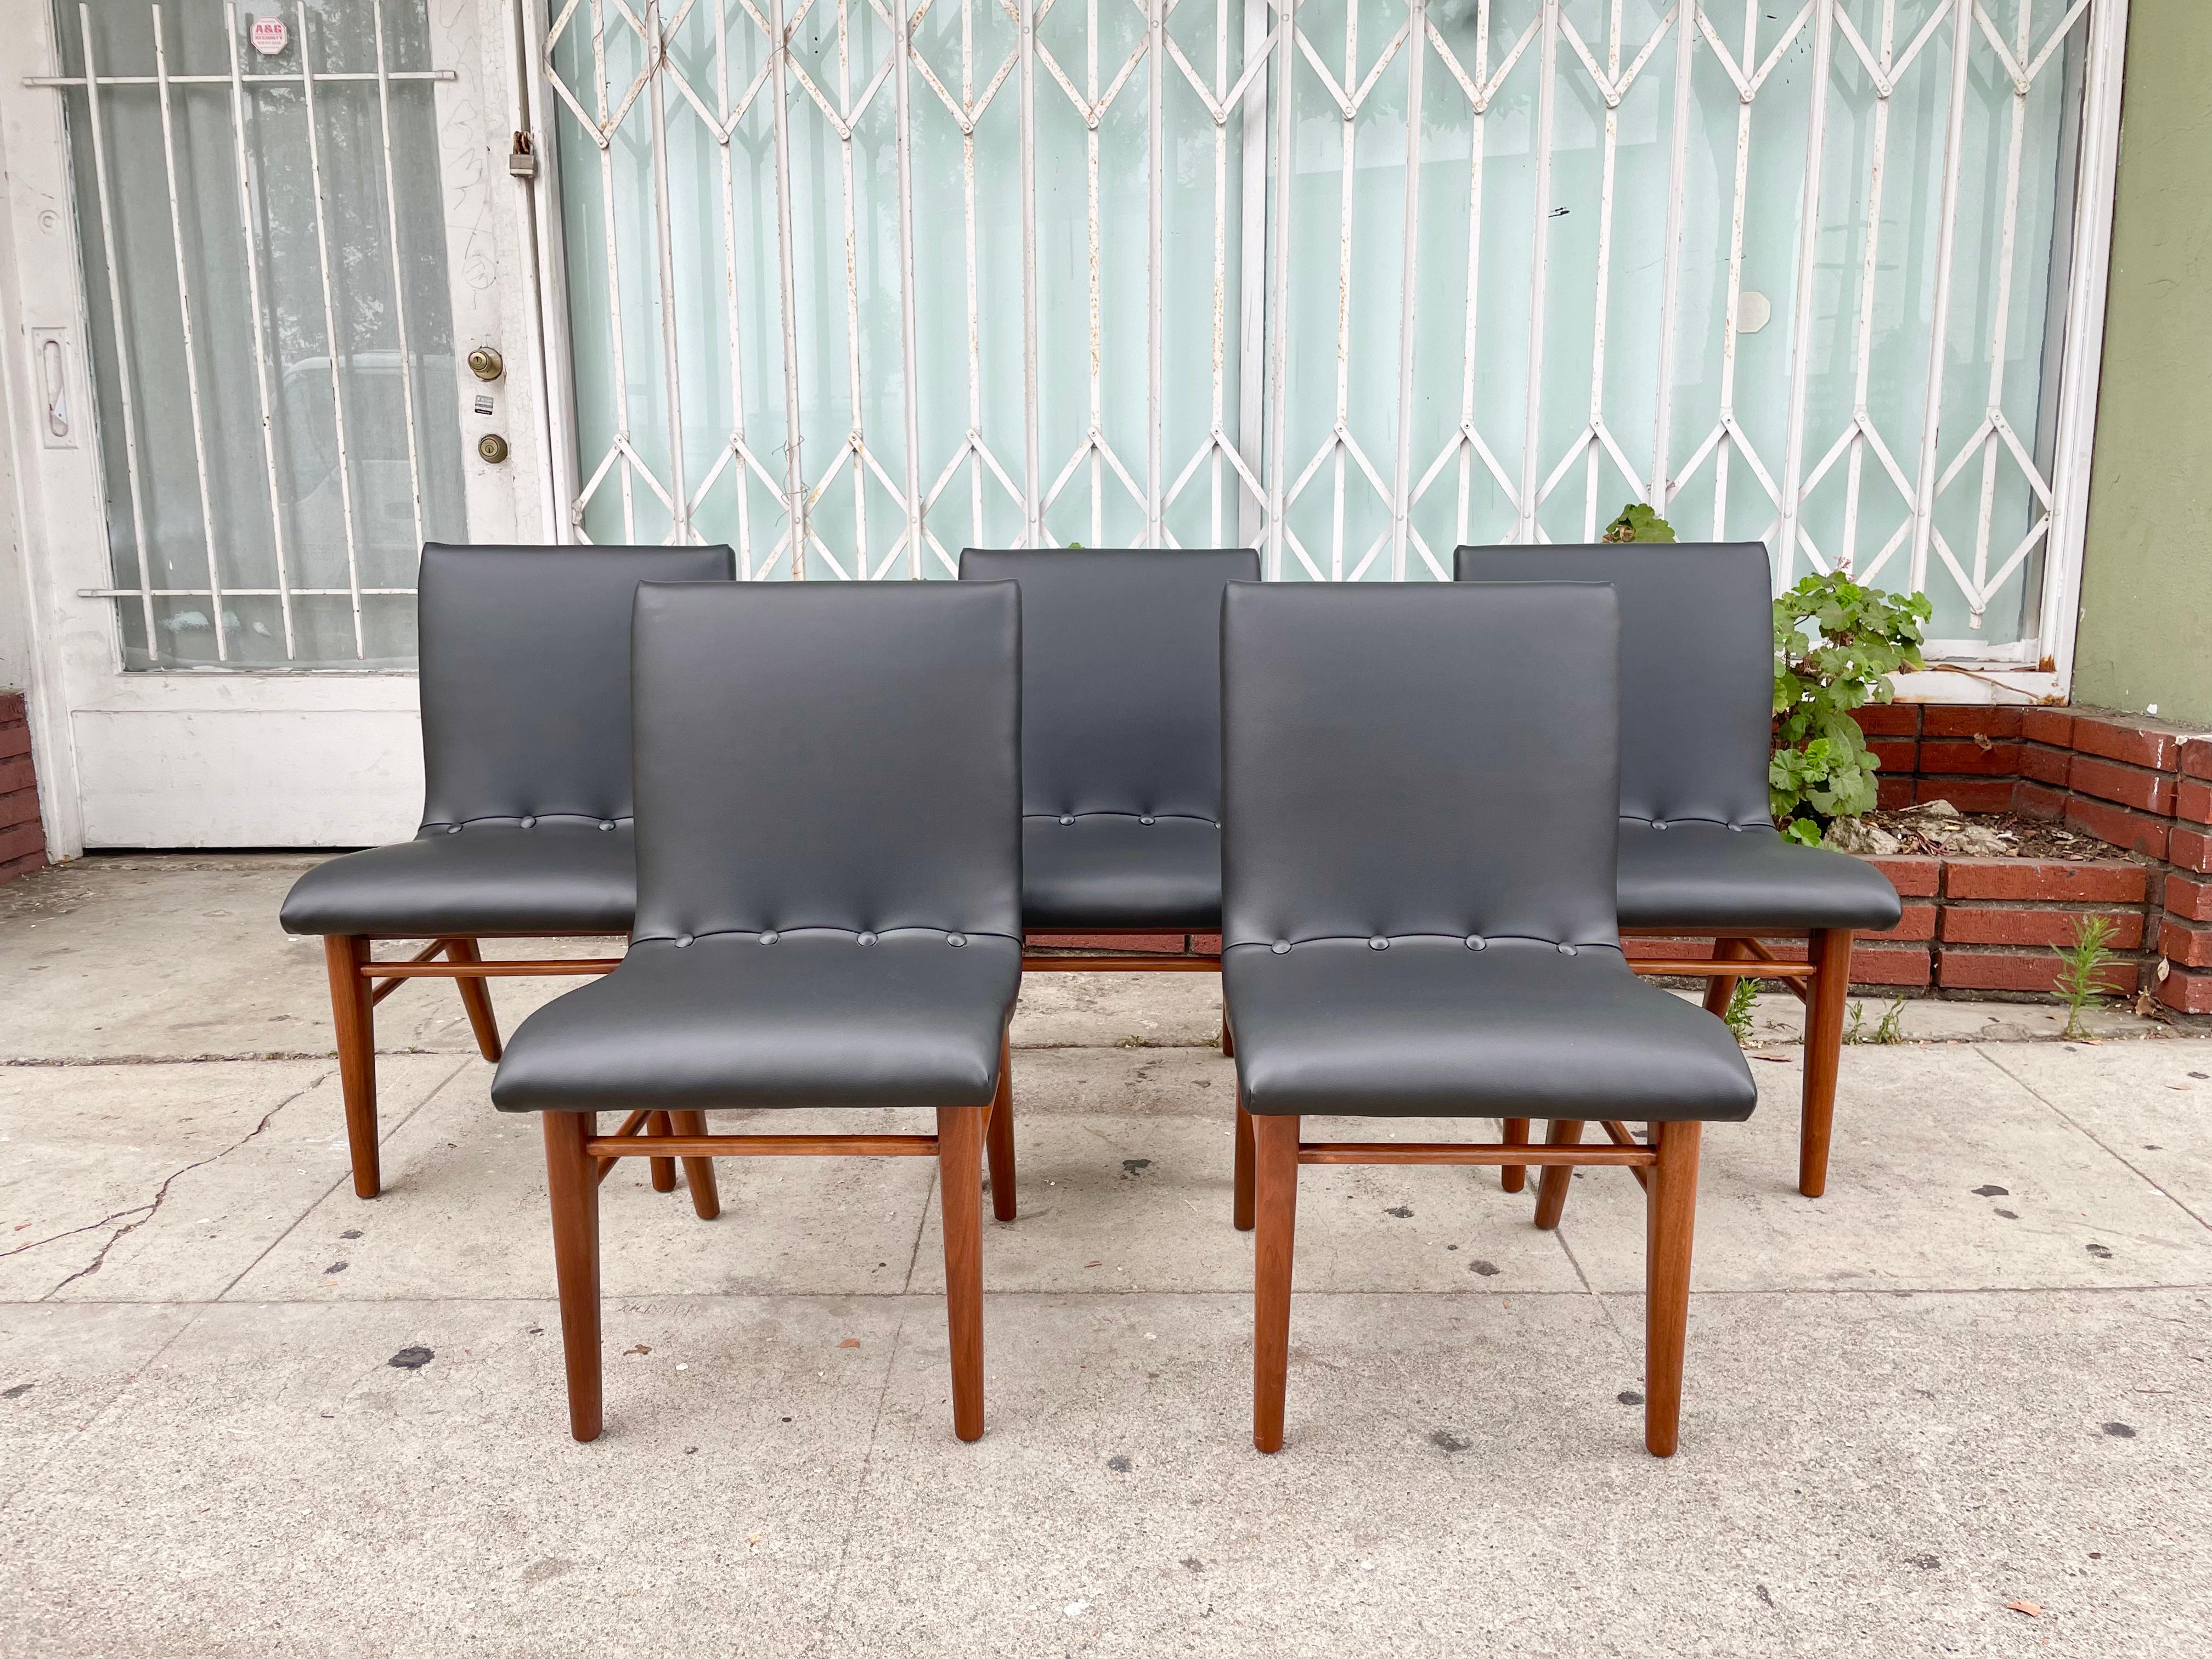 Midcentury walnut and leatherette dining chairs were manufactured in the United States, circa the 1950s. These vintage dining chairs feature a solid walnut base that has been refinished and reupholstered in black leatherette, bringing it back to its